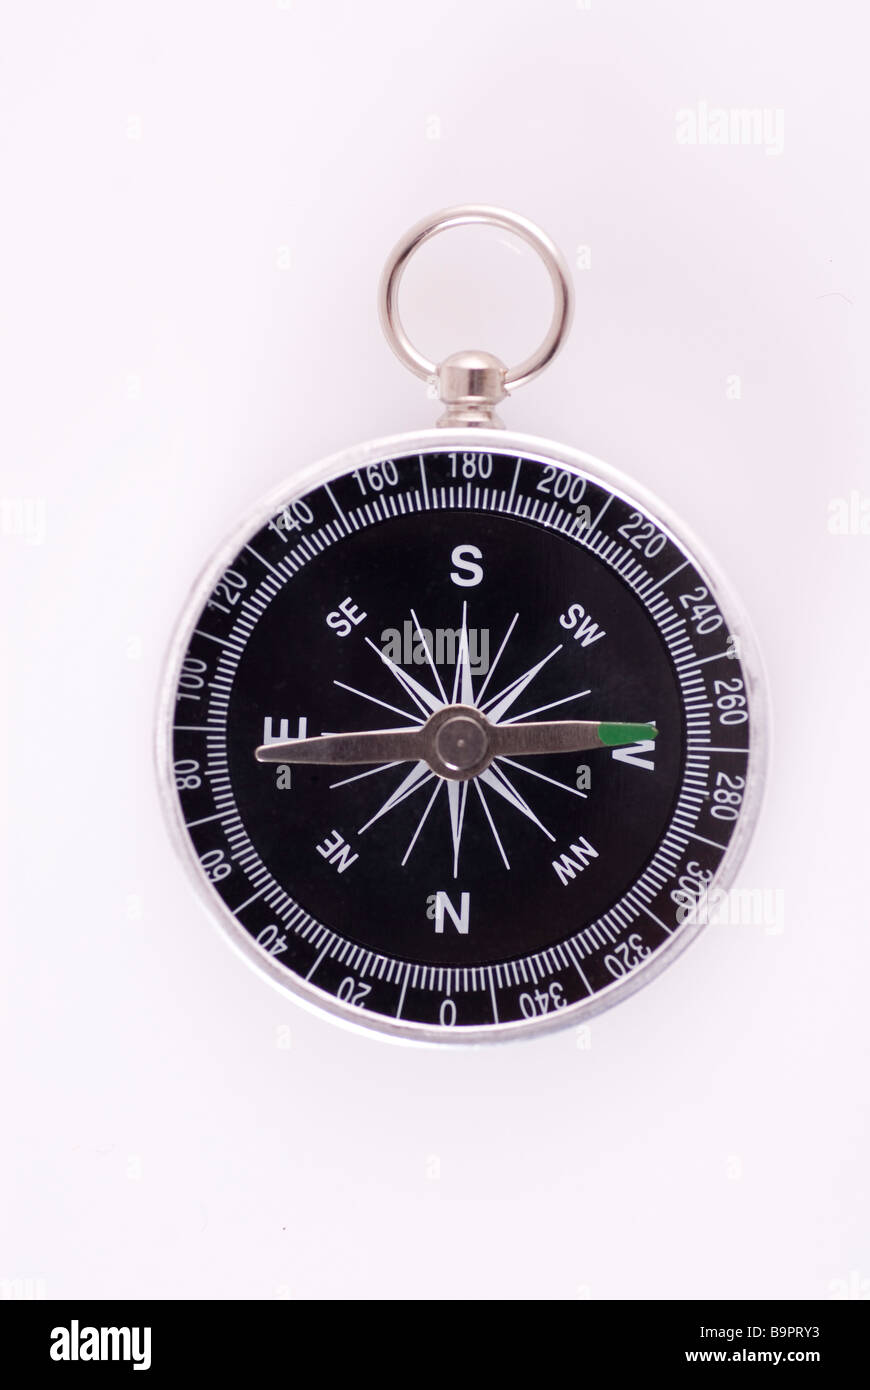 Overhead view of a traditional compass on a white background Stock Photo